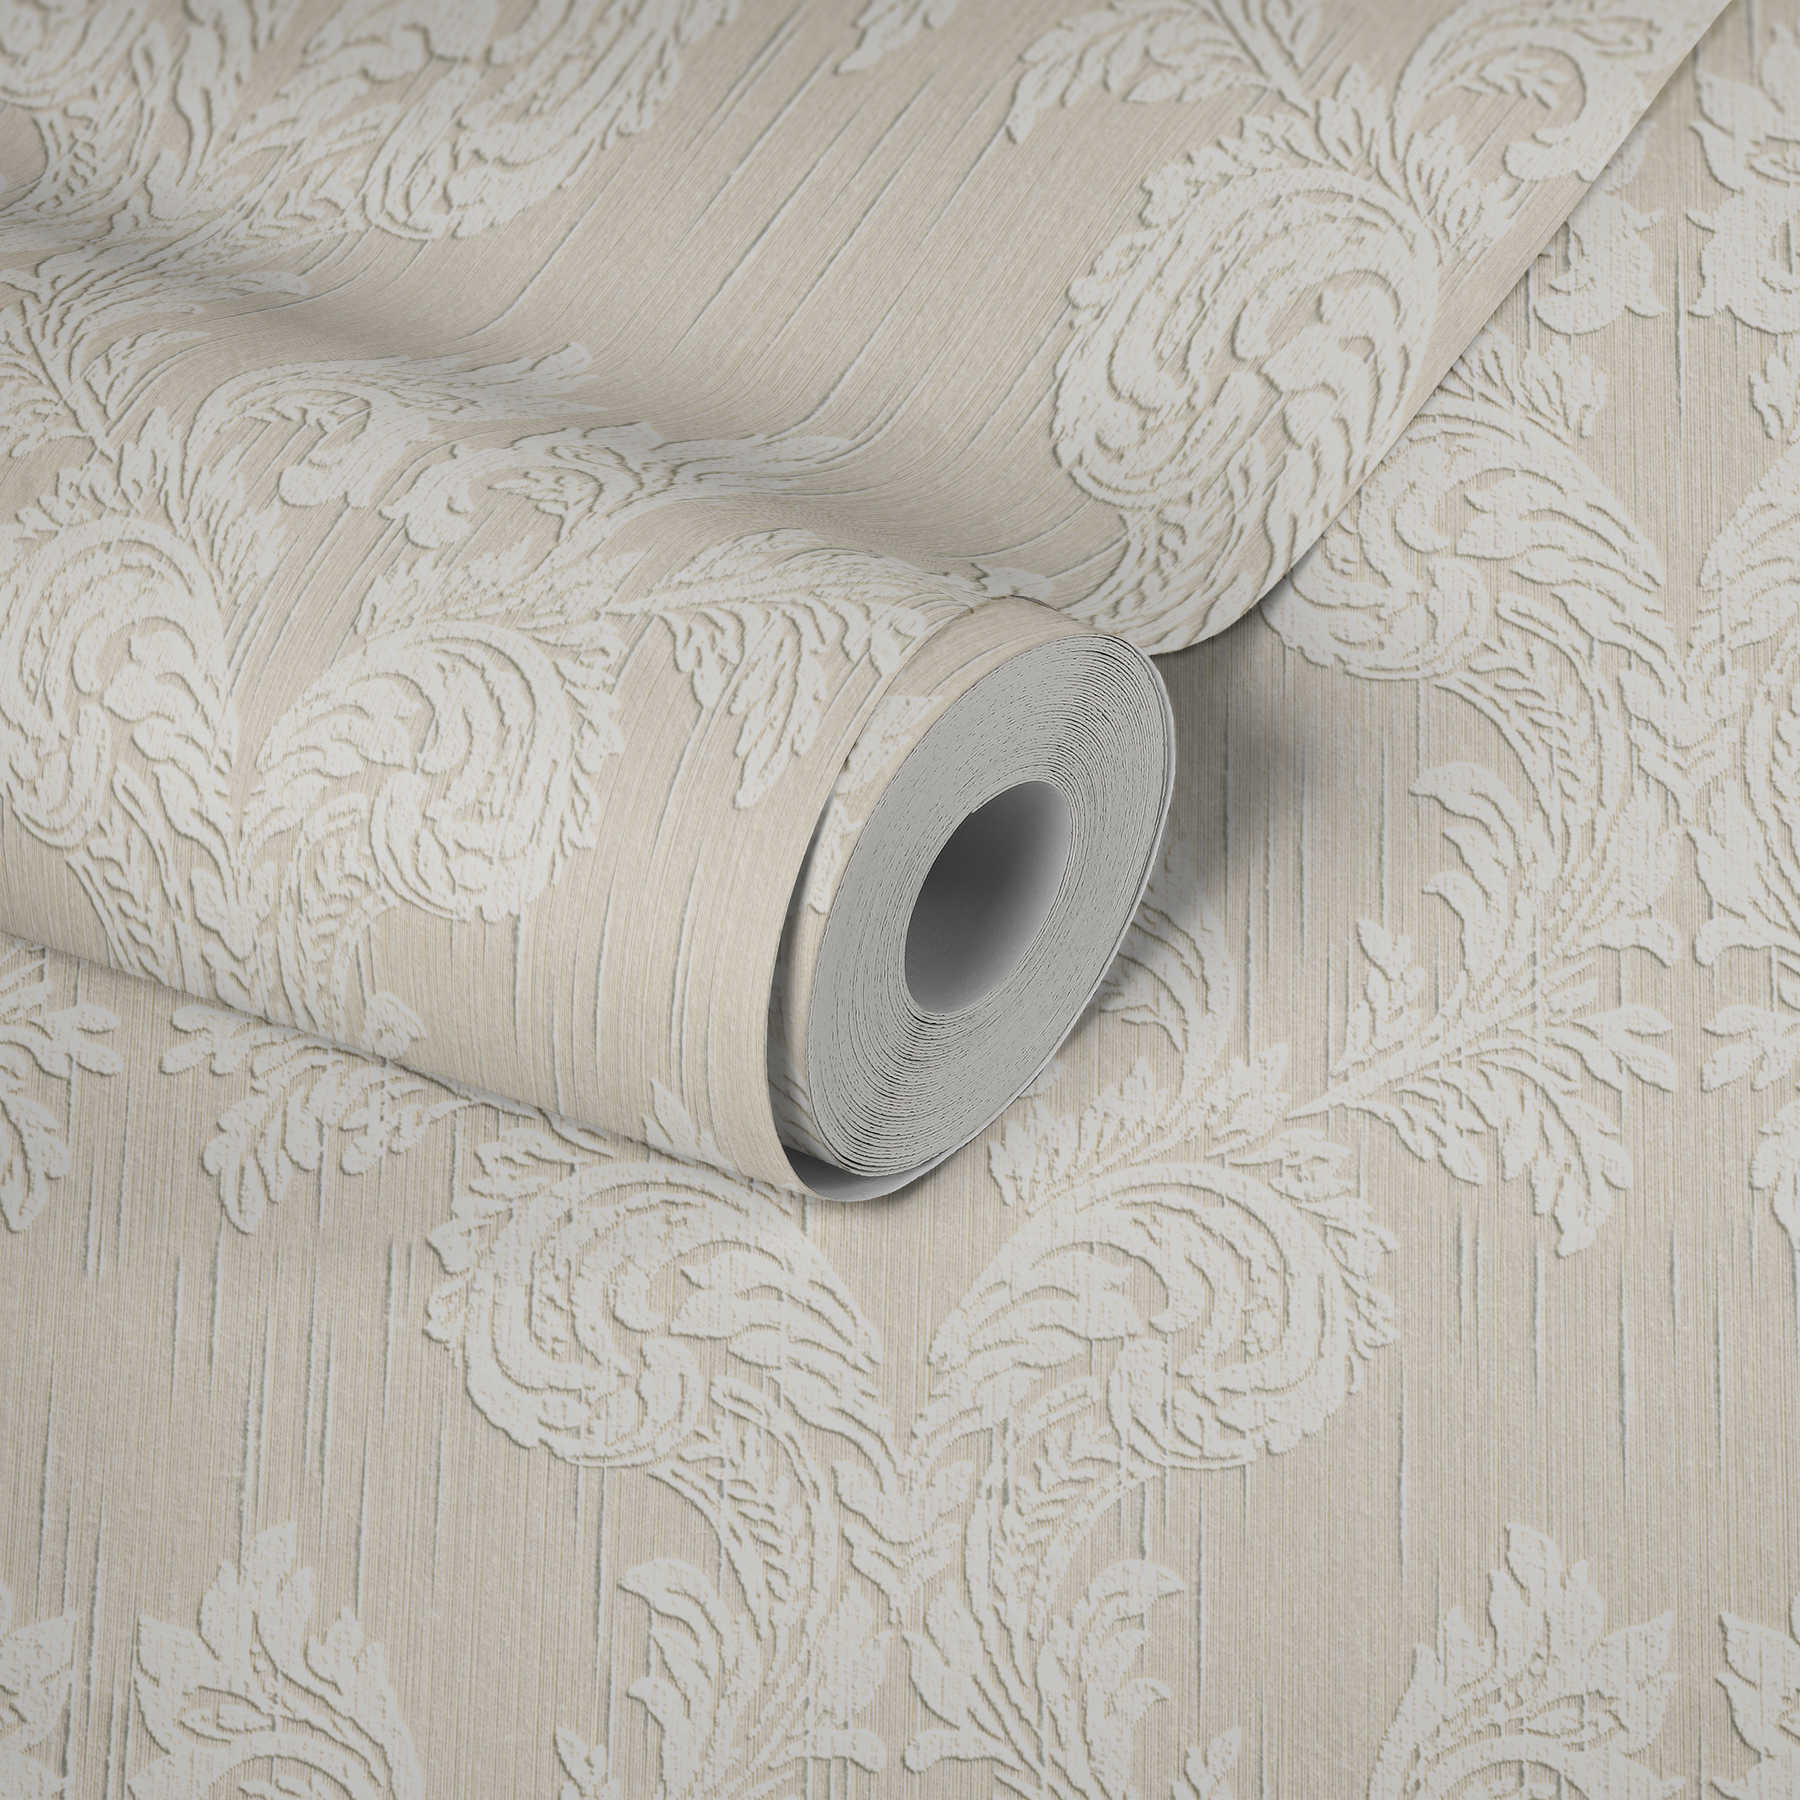             Textured wallpaper with dimensional ornamental vines - cream
        